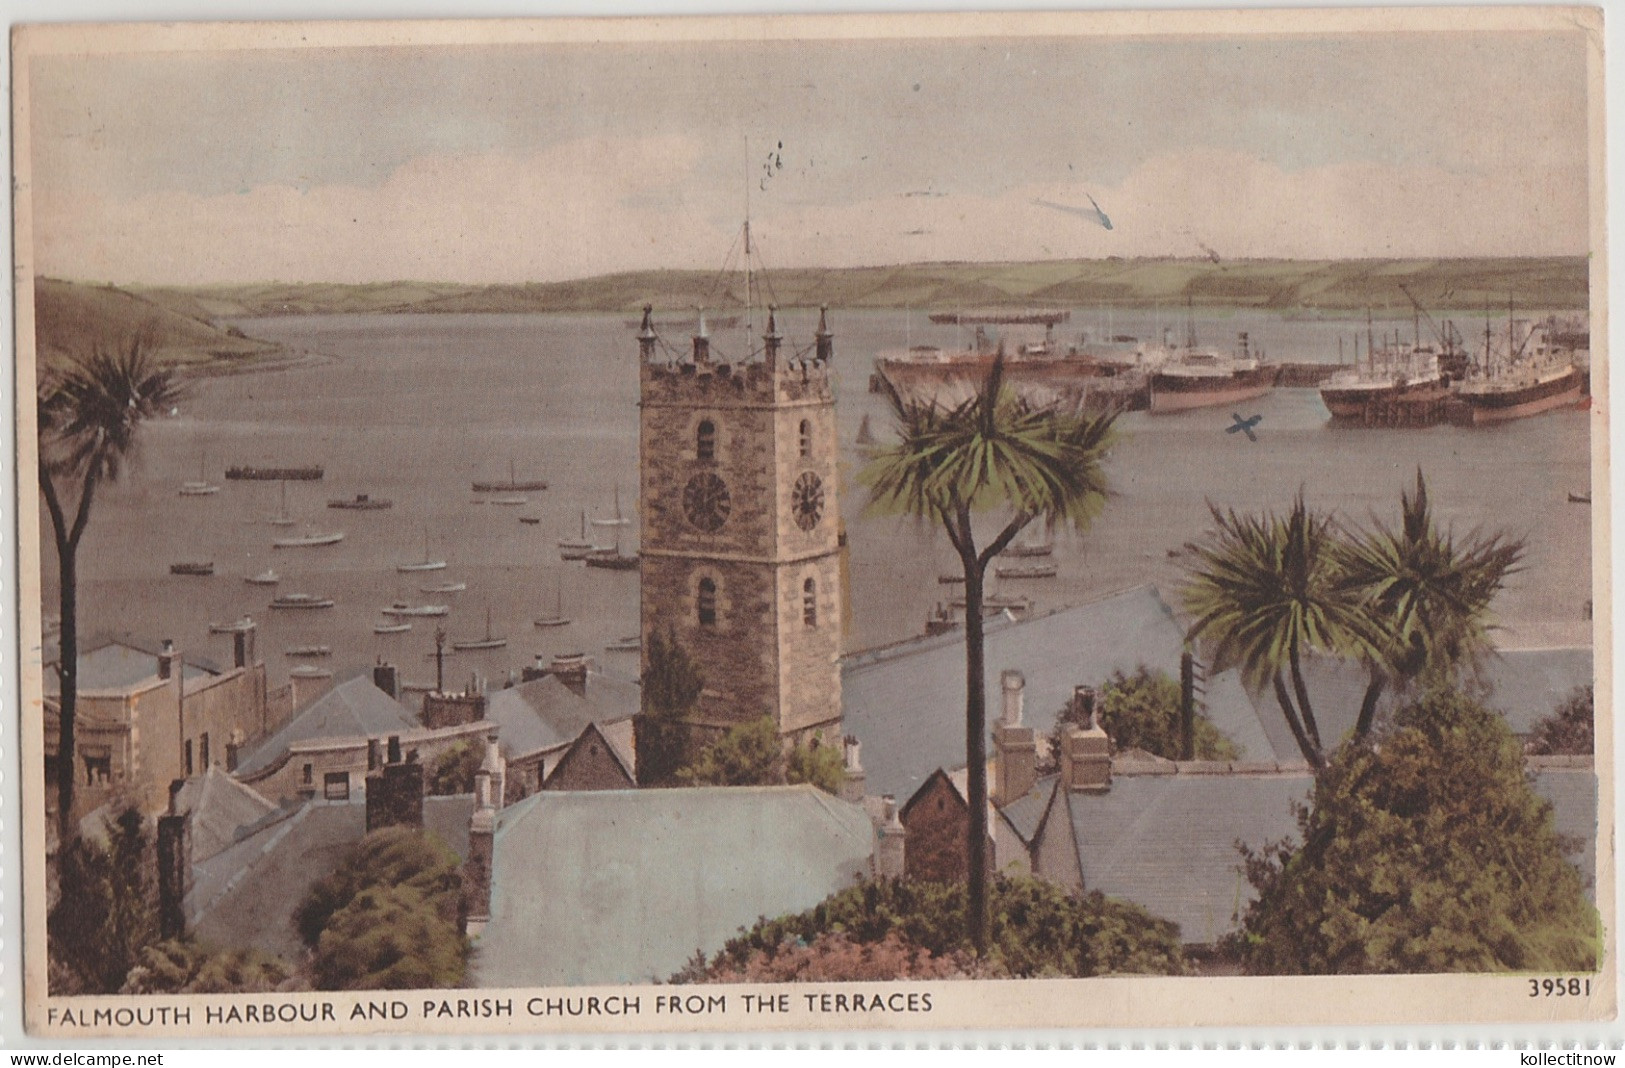 FALMOUTH HARBOUR AND PARISH CHURCH FROM THE TERRACES - Falmouth